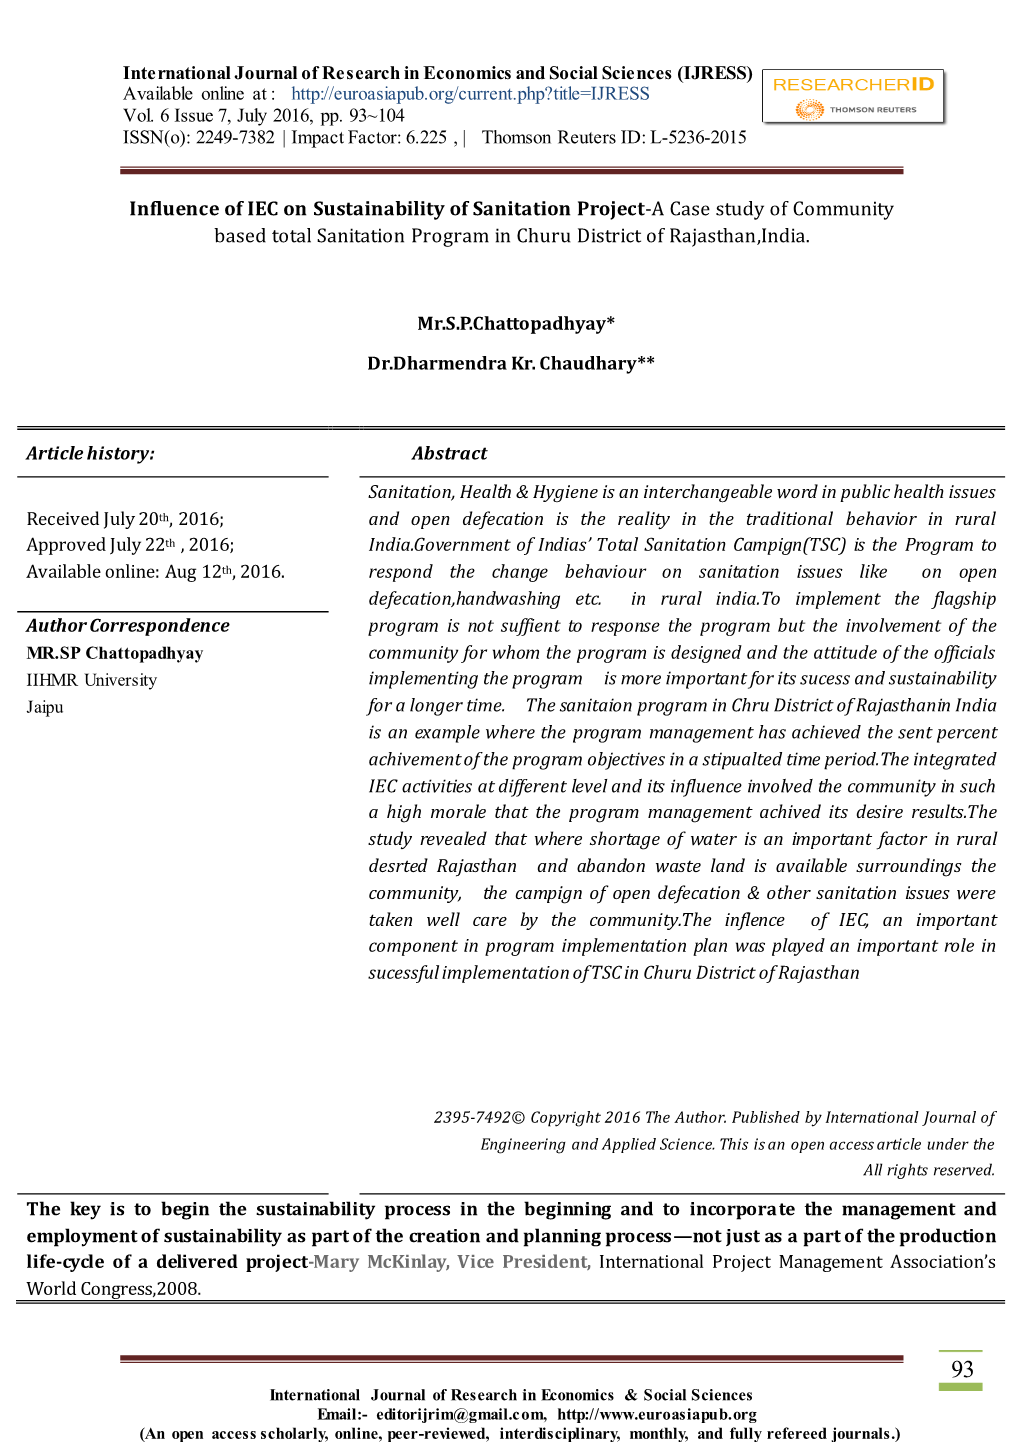 Influence of IEC on Sustainability of Sanitation Project-A Case Study of Community Based Total Sanitation Program in Churu District of Rajasthan,India